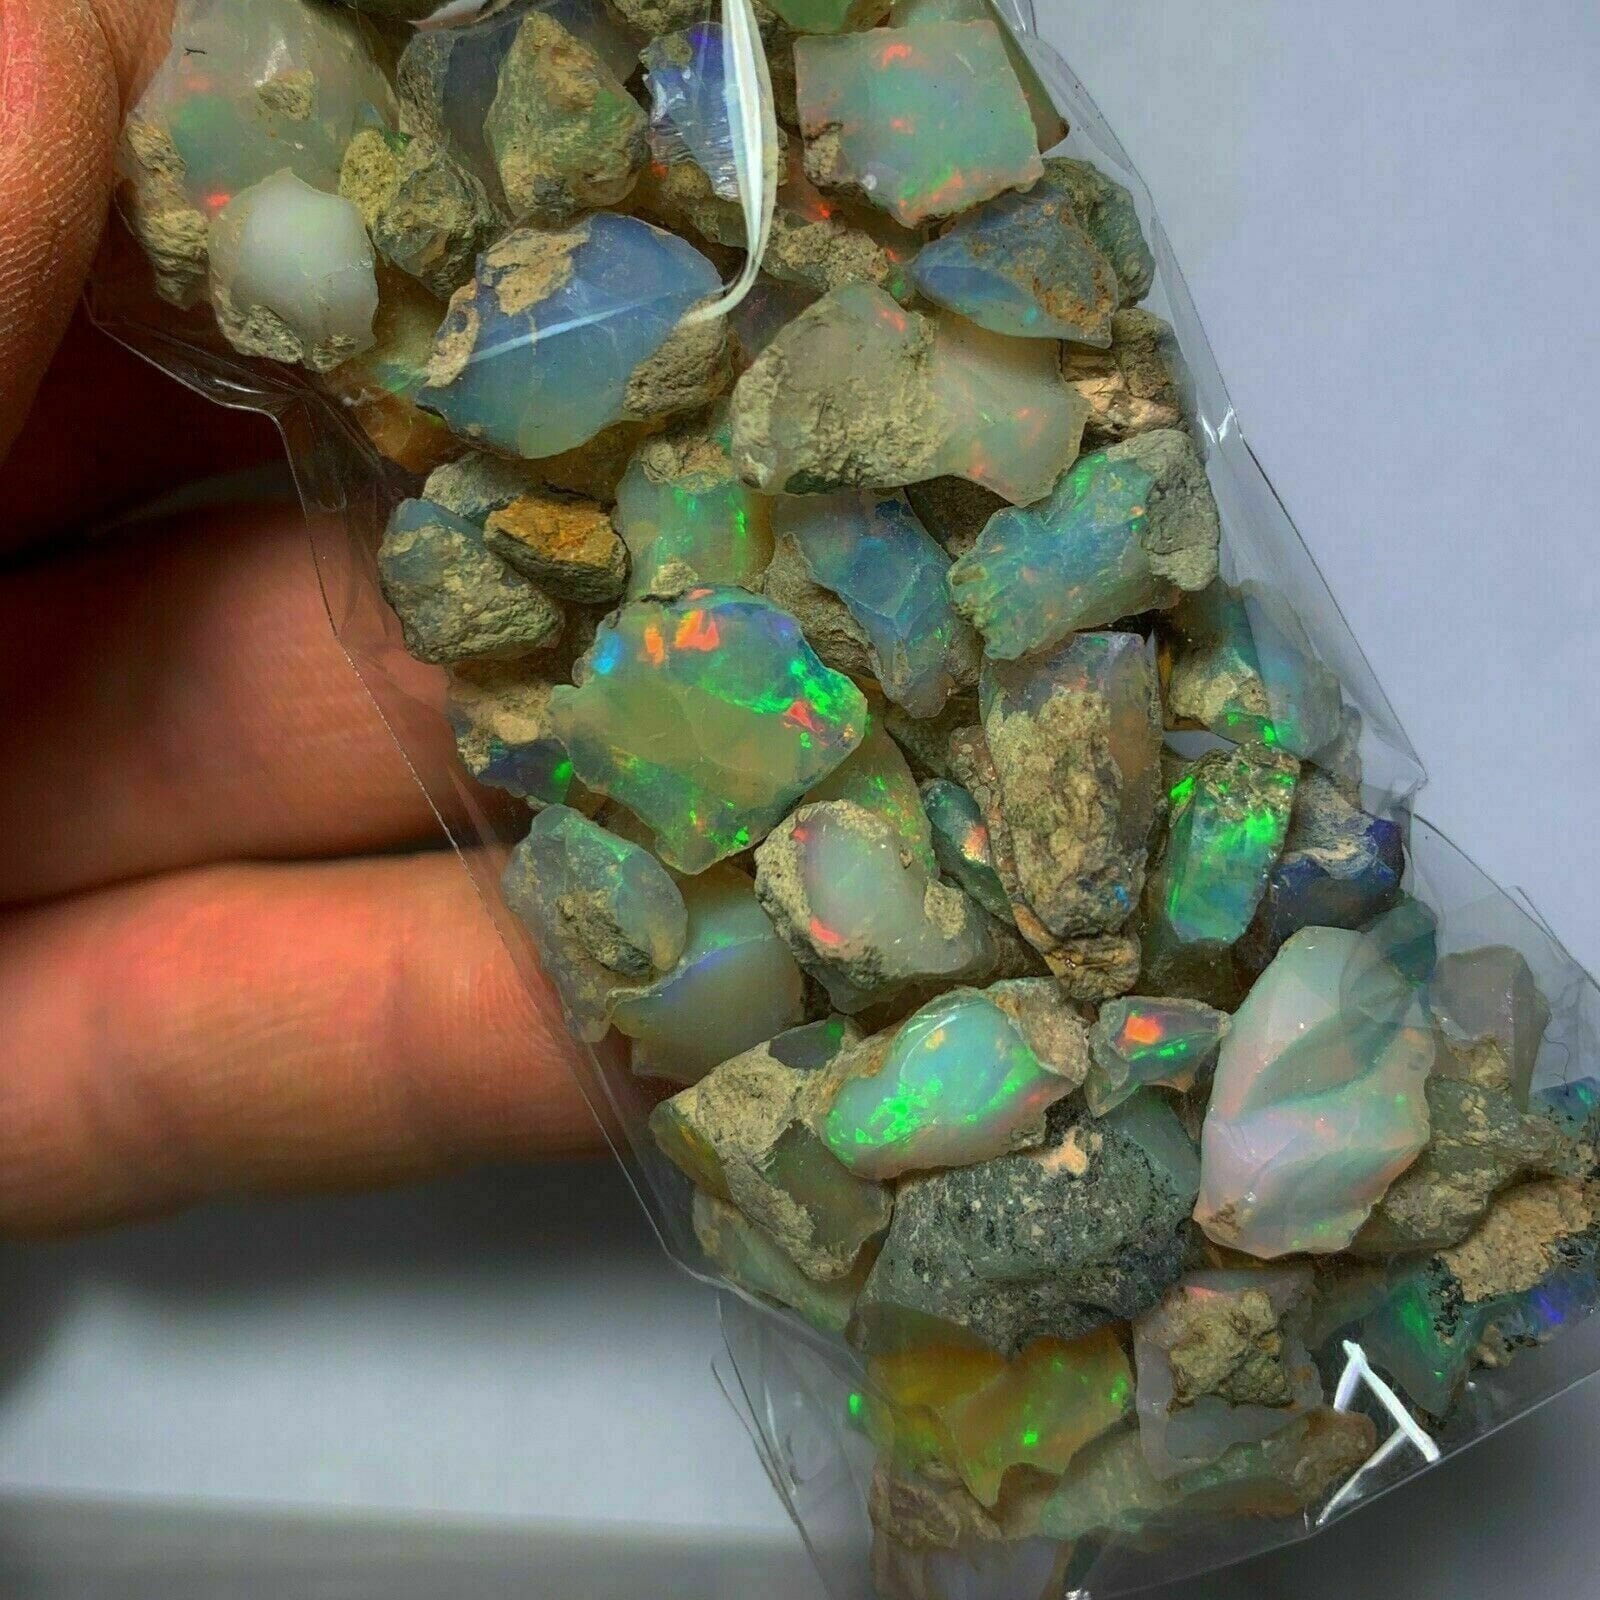 Rough Opal from Ethiopia, 18.2 carats - Emerald Village